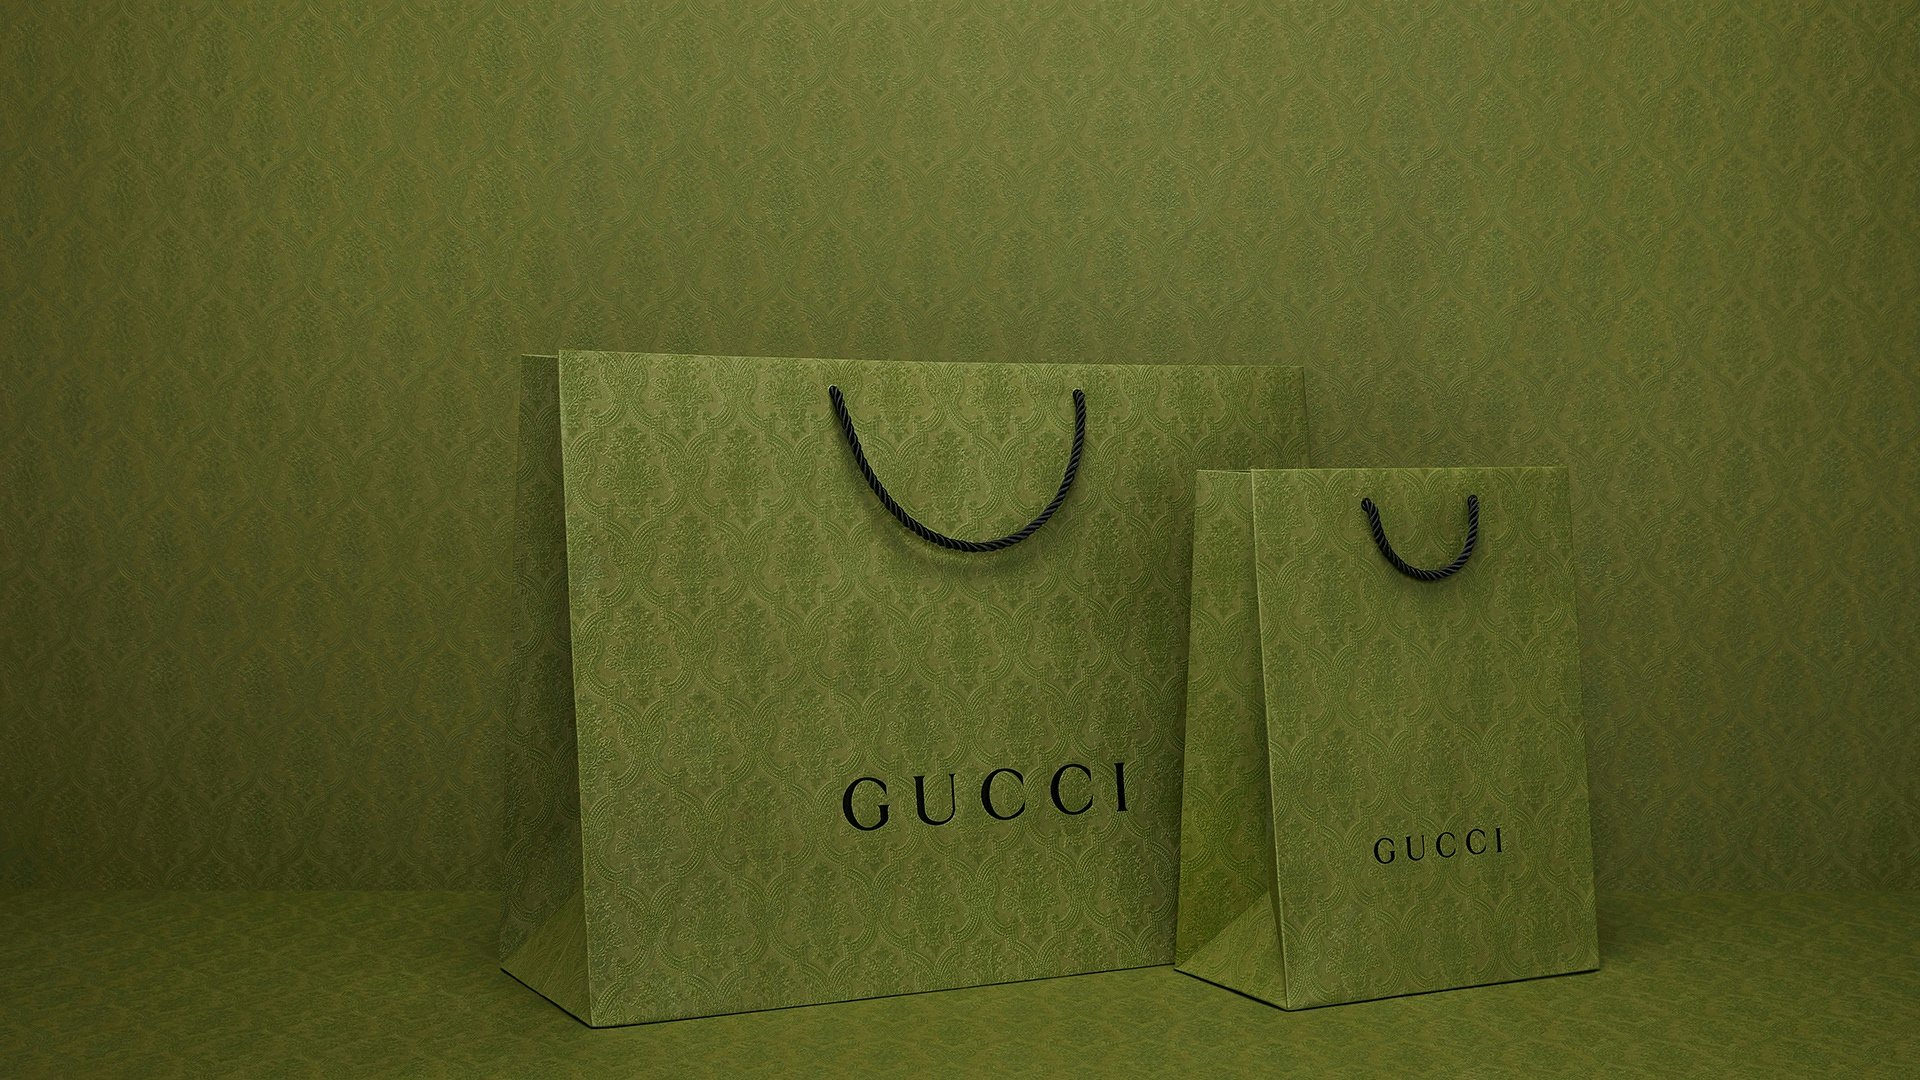 Younger generations are much more concerned with sustainability than previous generations have been, and it’s time for luxury to address their needs wholeheartedly. Photo: Courtesy of Gucci